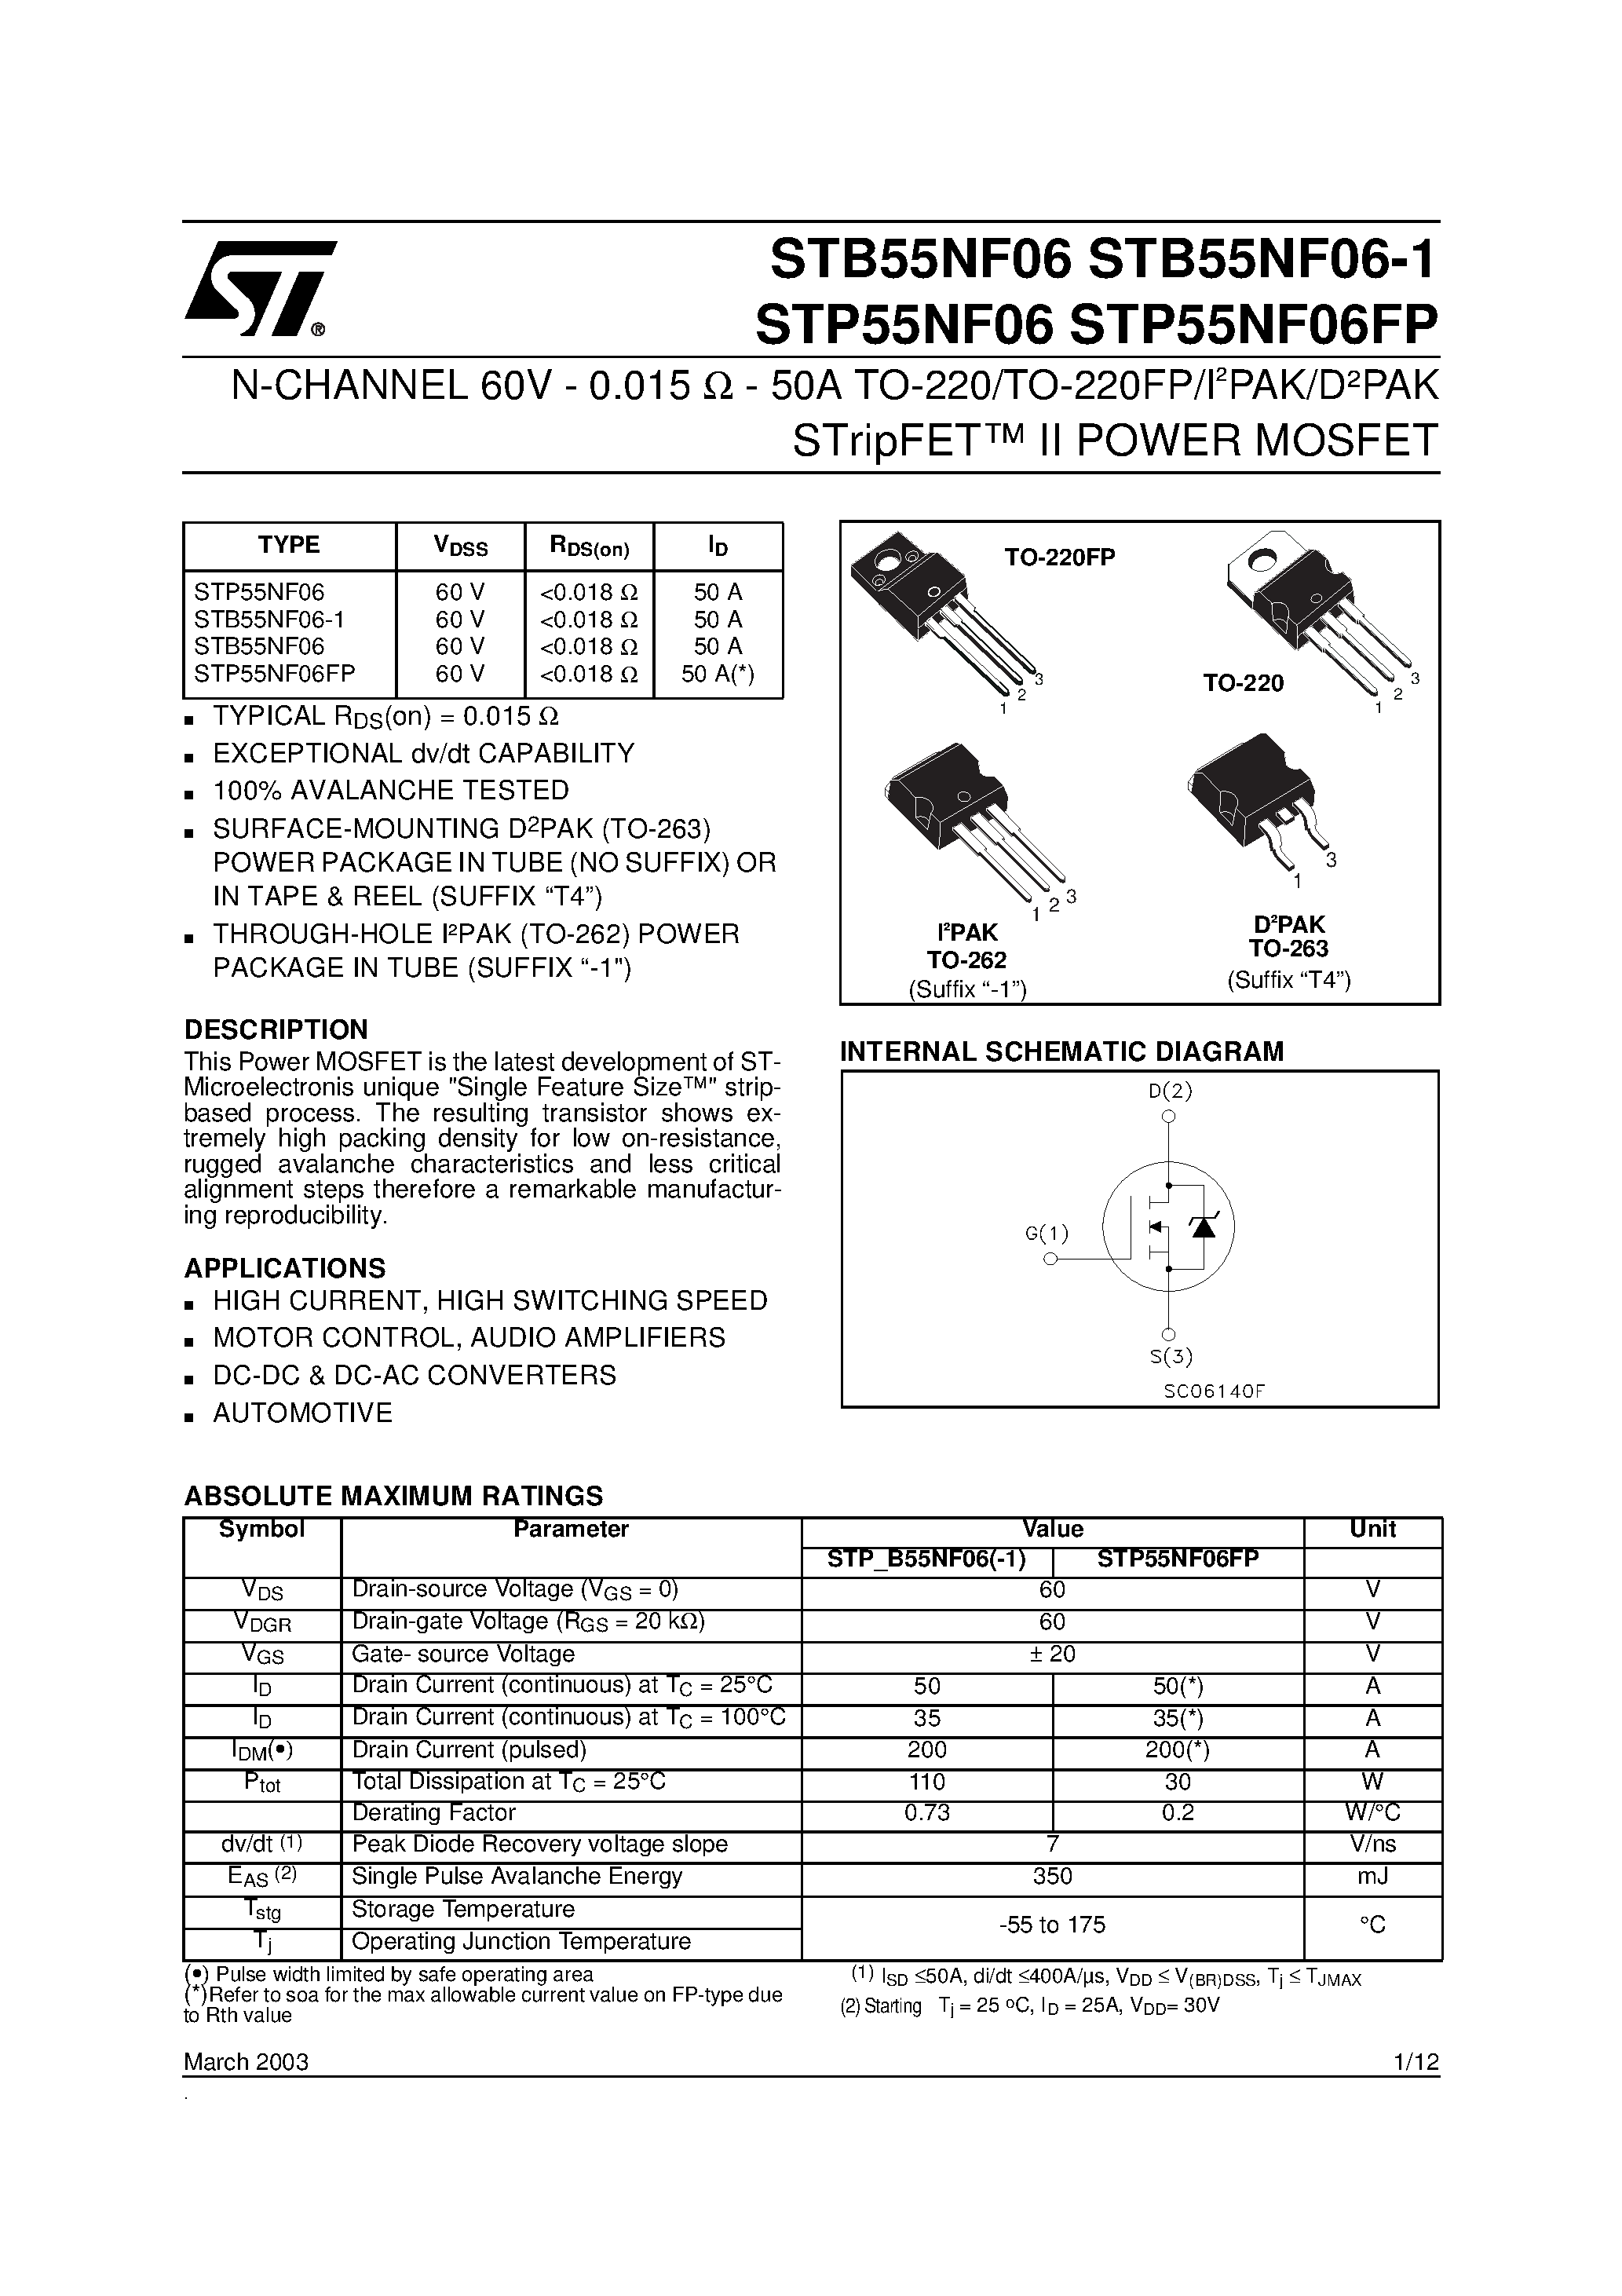 Datasheet STP55NF06 - N-CHANNEL POWER MOSFET page 1